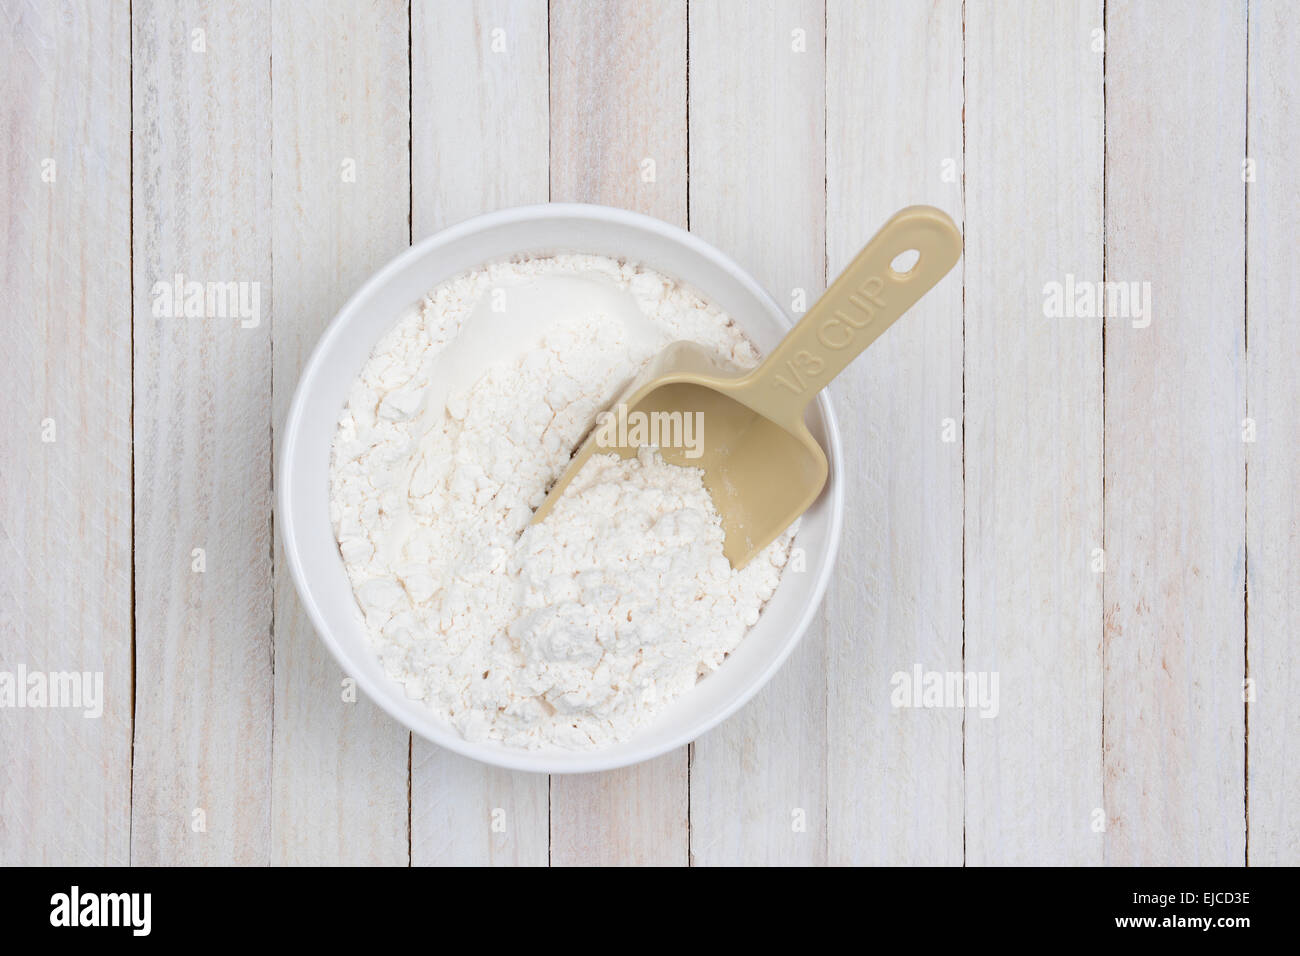 Overhead image of a bowl of flour on a white wood rustic kitchen table. A plastic scoop is stuck in the flour. Stock Photo